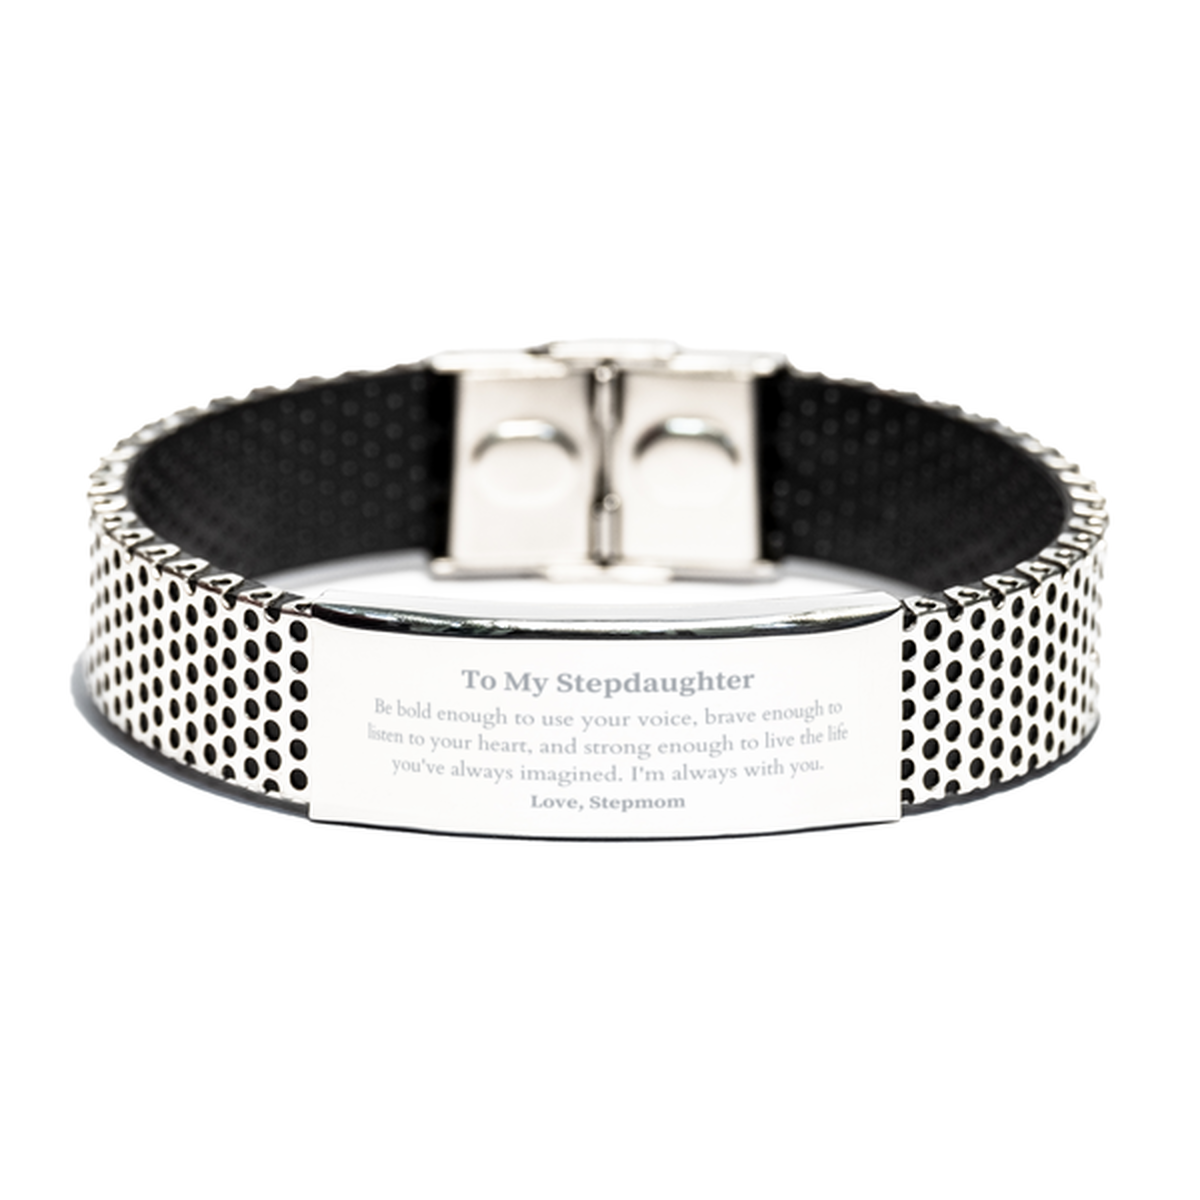 Keepsake Stepdaughter Stainless Steel Bracelet Gift Idea Graduation Christmas Birthday Stepdaughter from Stepmom, Stepdaughter Be bold enough to use your voice, brave enough to listen to your heart. Love, Stepmom